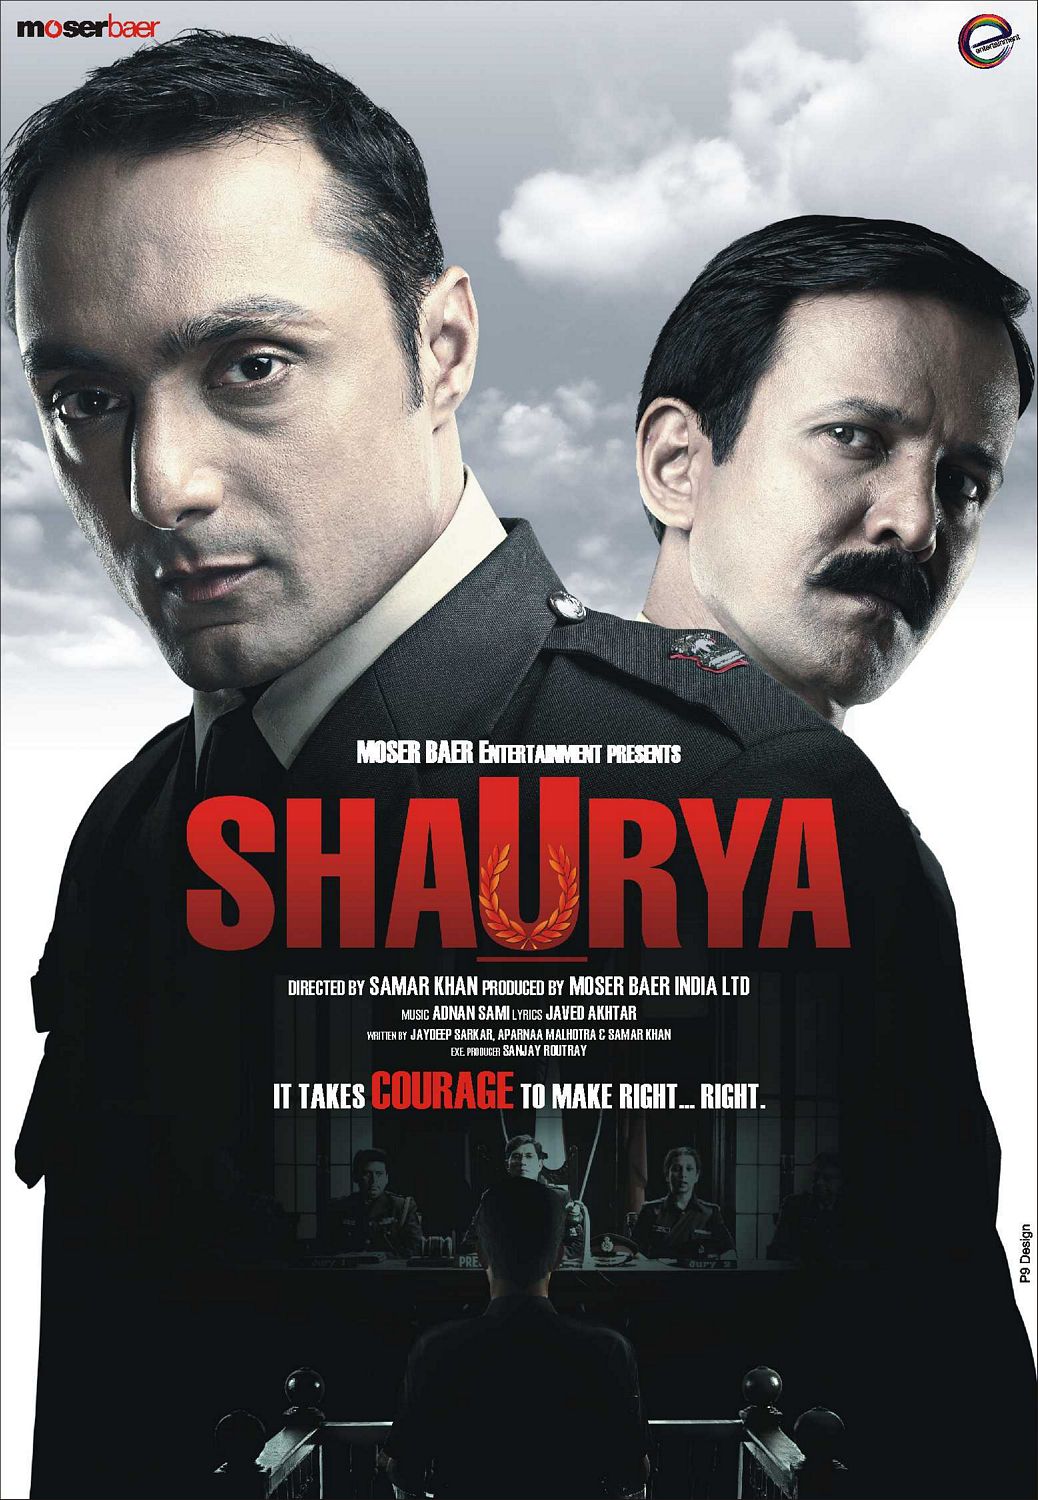 Extra Large Movie Poster Image for Shaurya (#3 of 4)